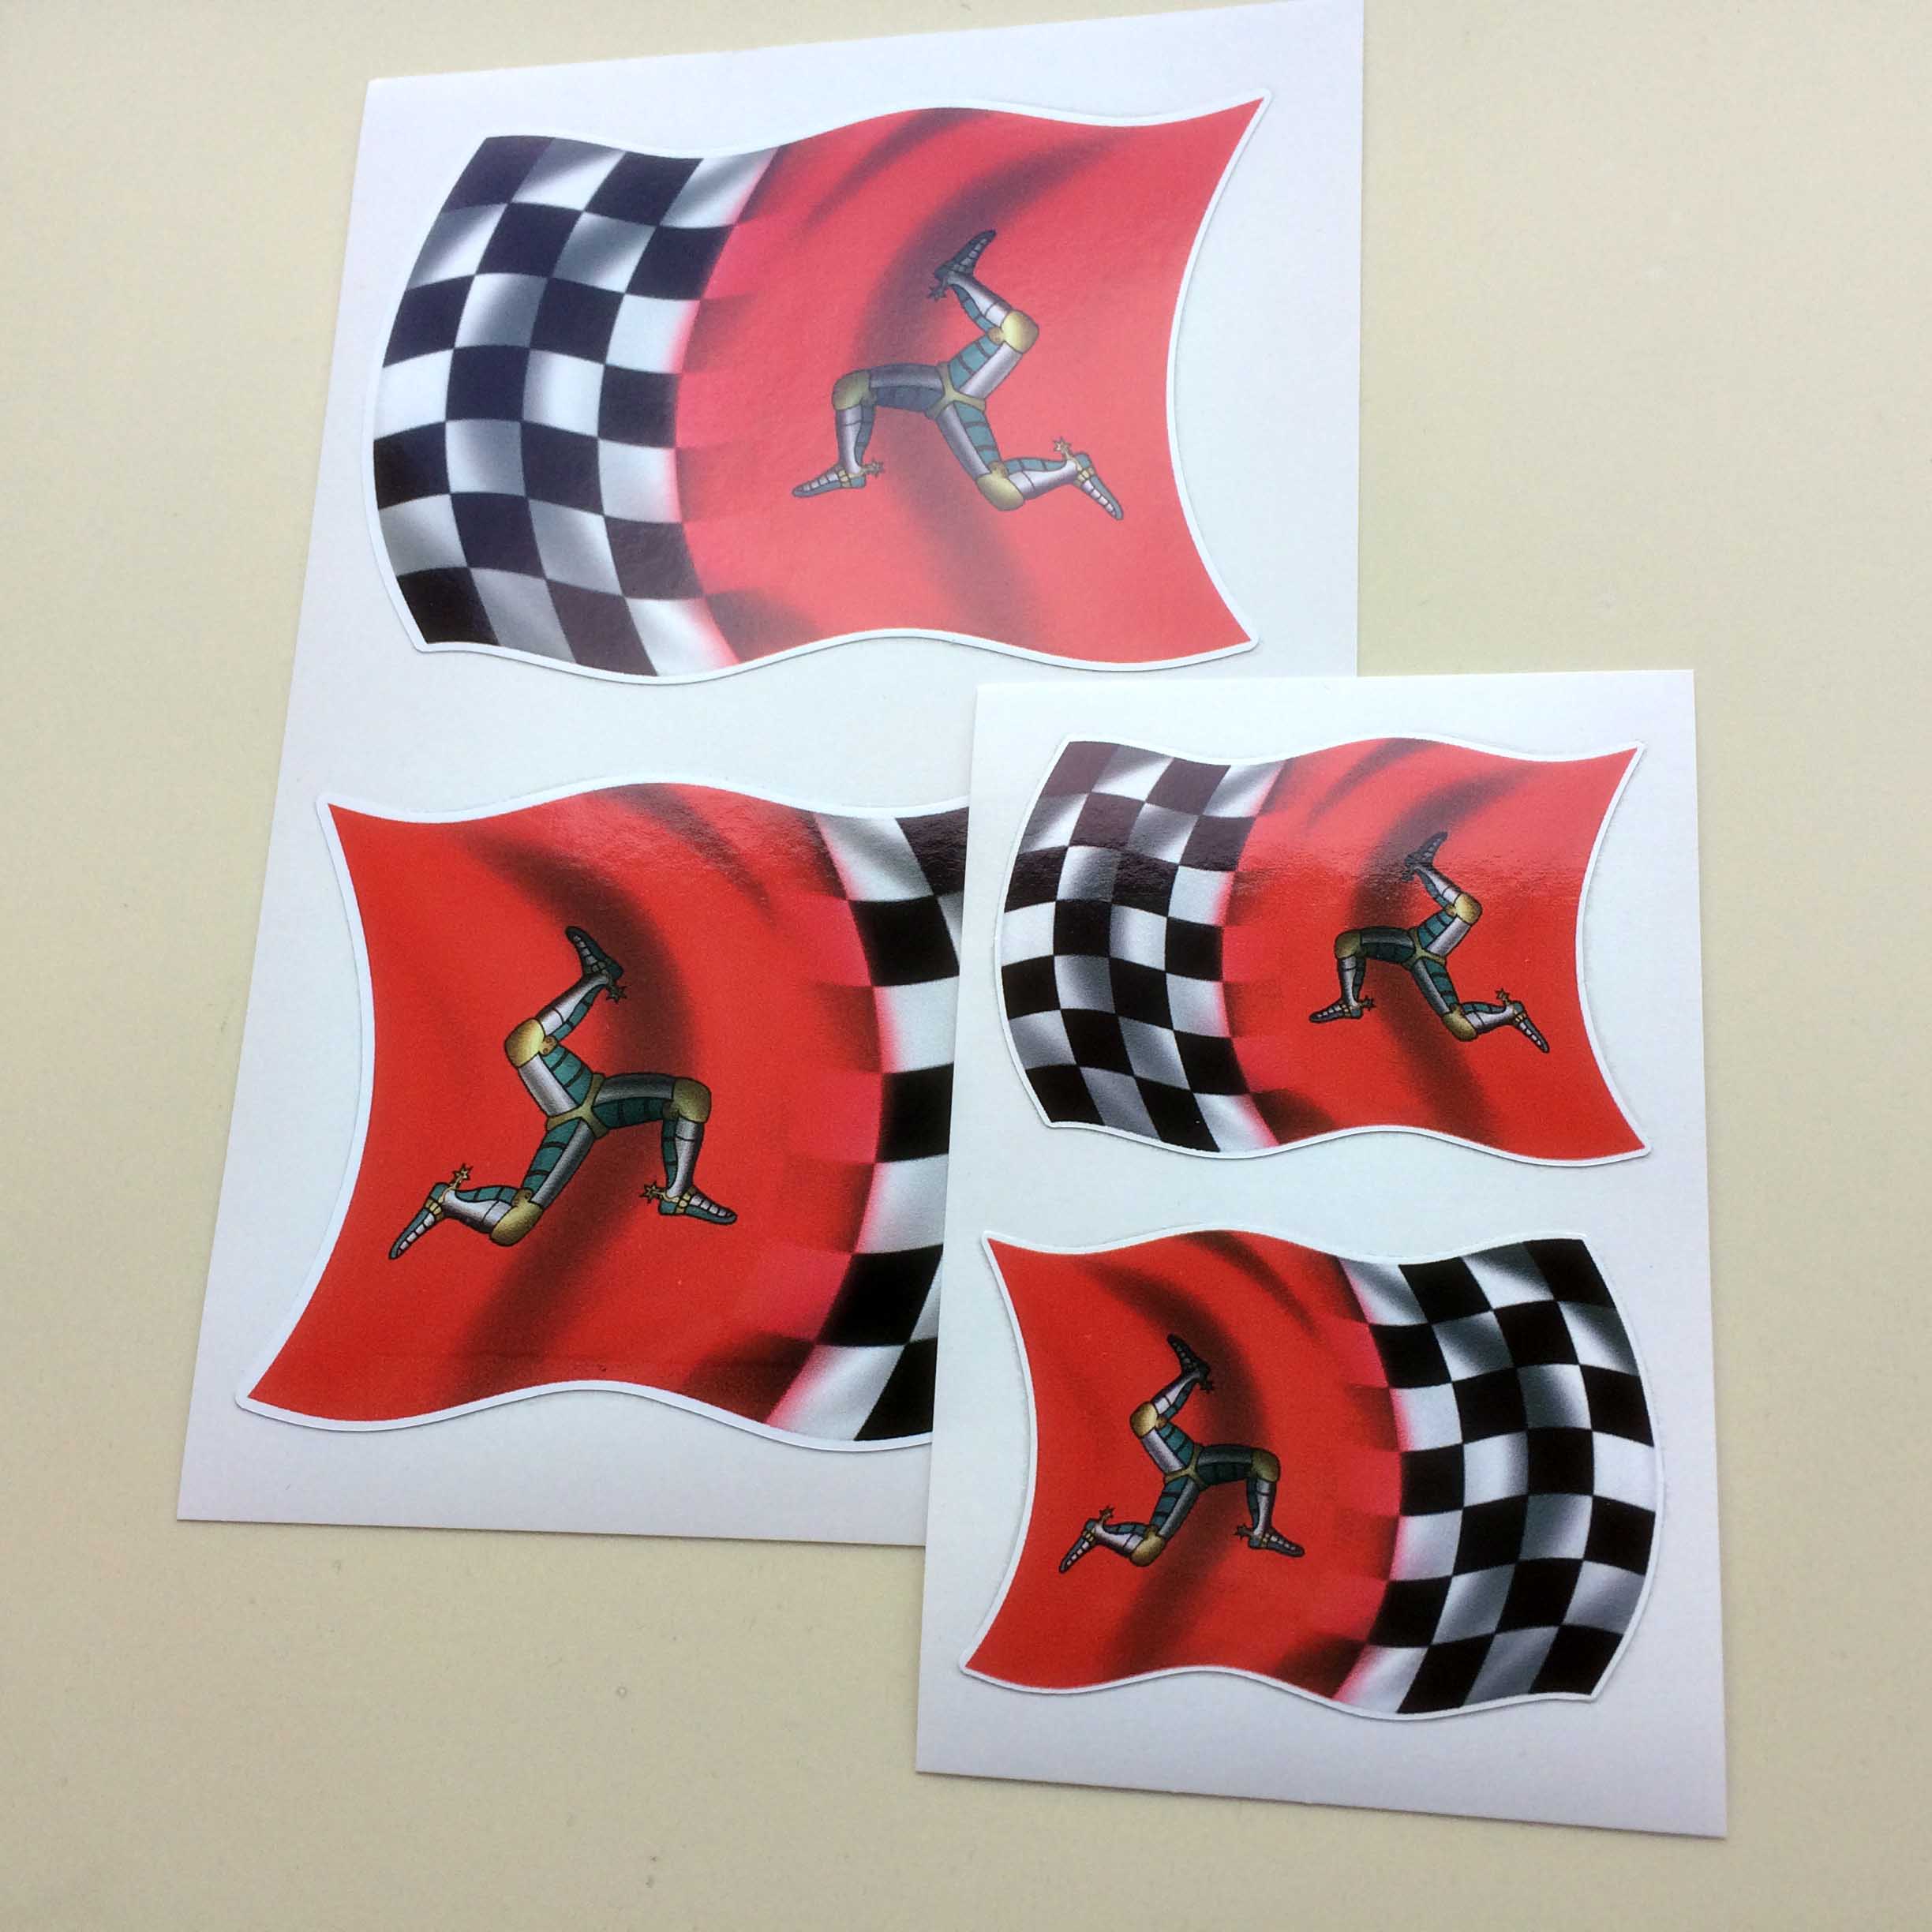 ISLE OF MAN FLAG STICKERS Three armoured legs with golden spurs on a red background and a black and white chequered flag. A wavy flag of two halves.